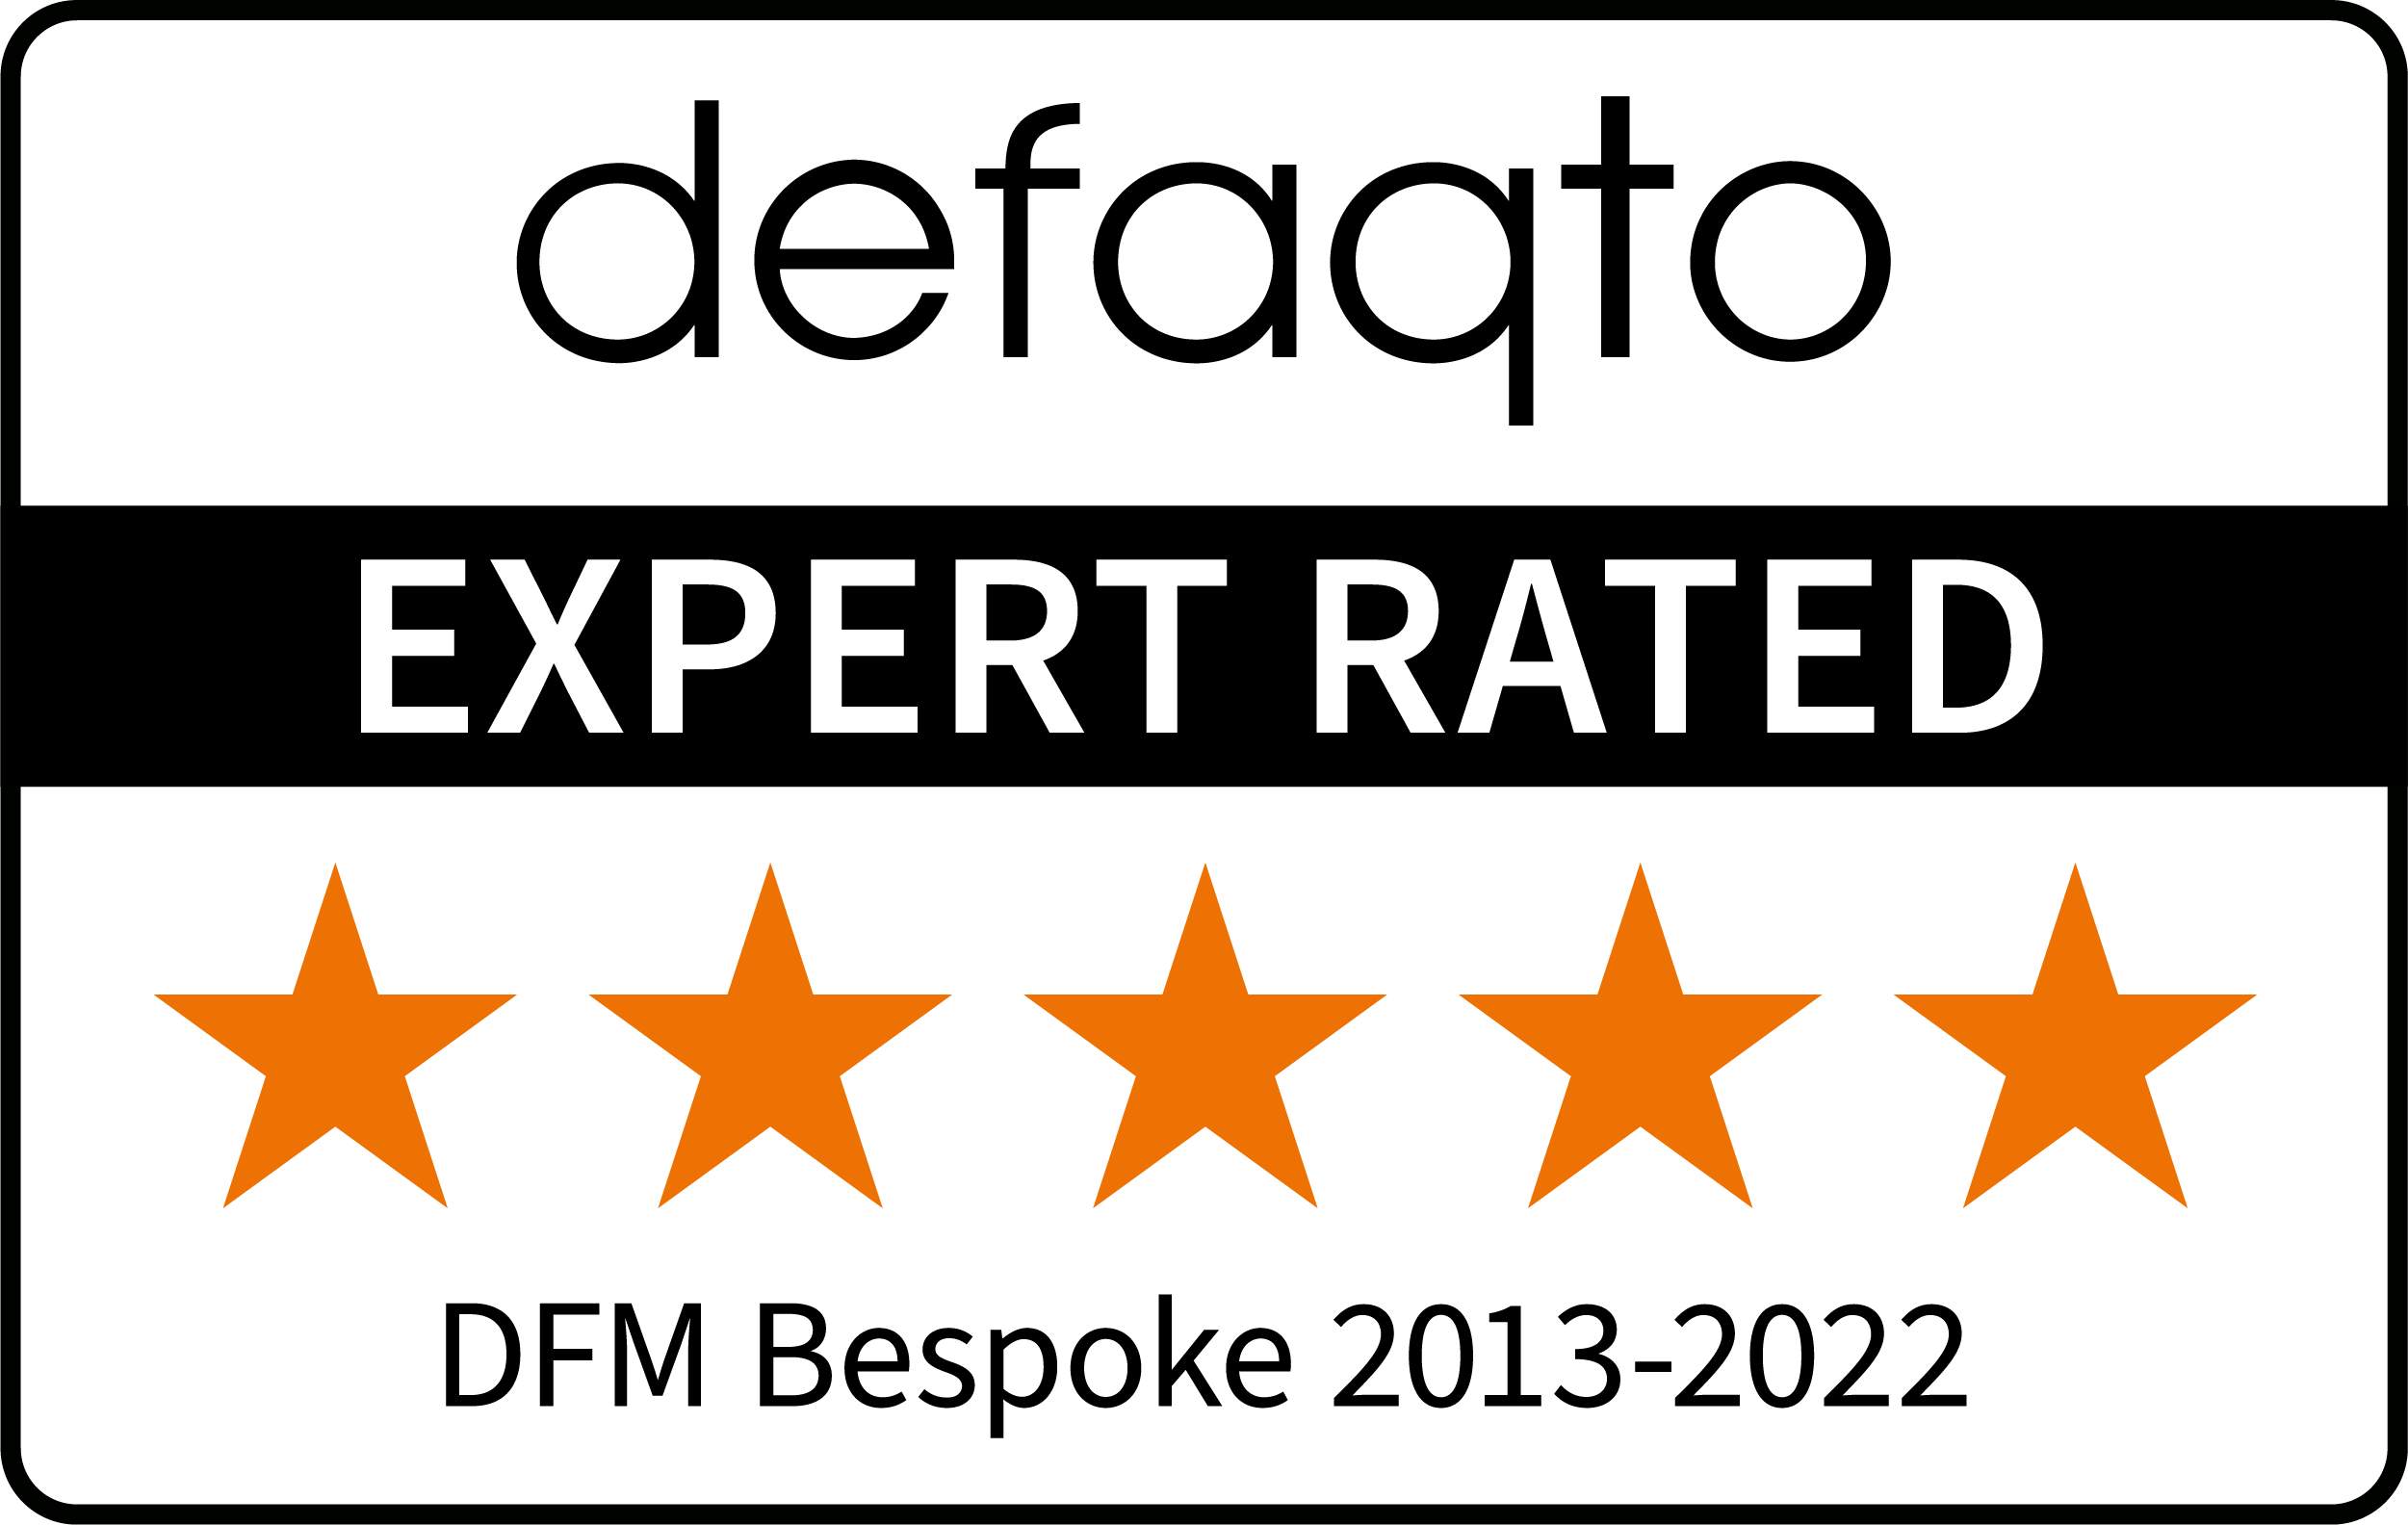 DFM-Bespoke-Rating-Category-and-Year-5-2013-2022-RGB.png